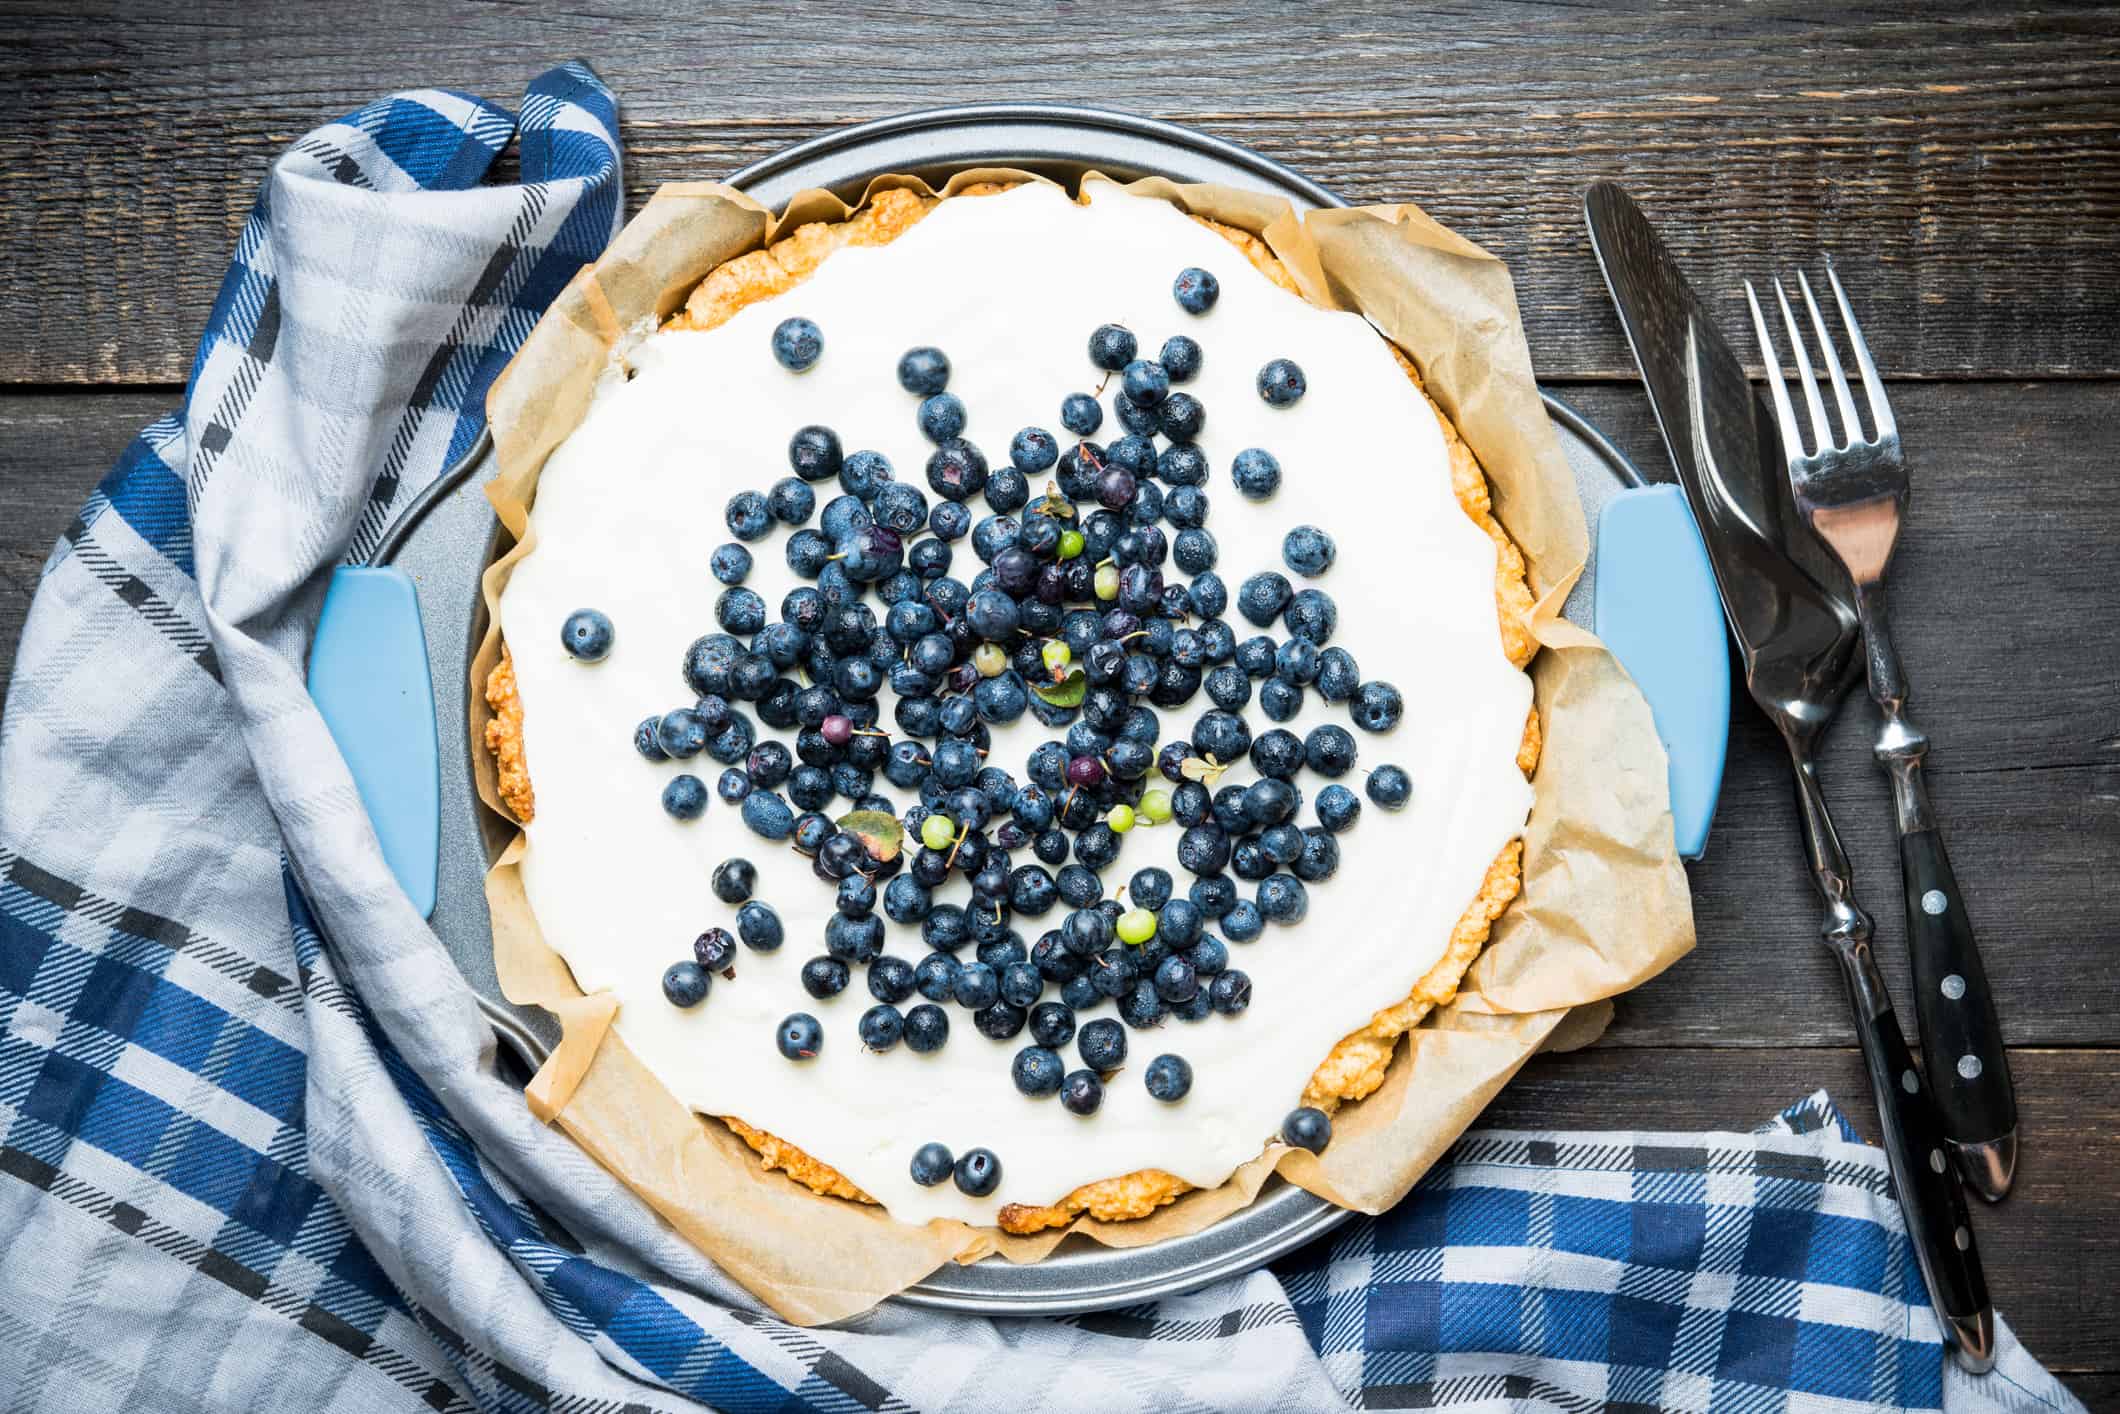 Cheesecake with wild blueberries